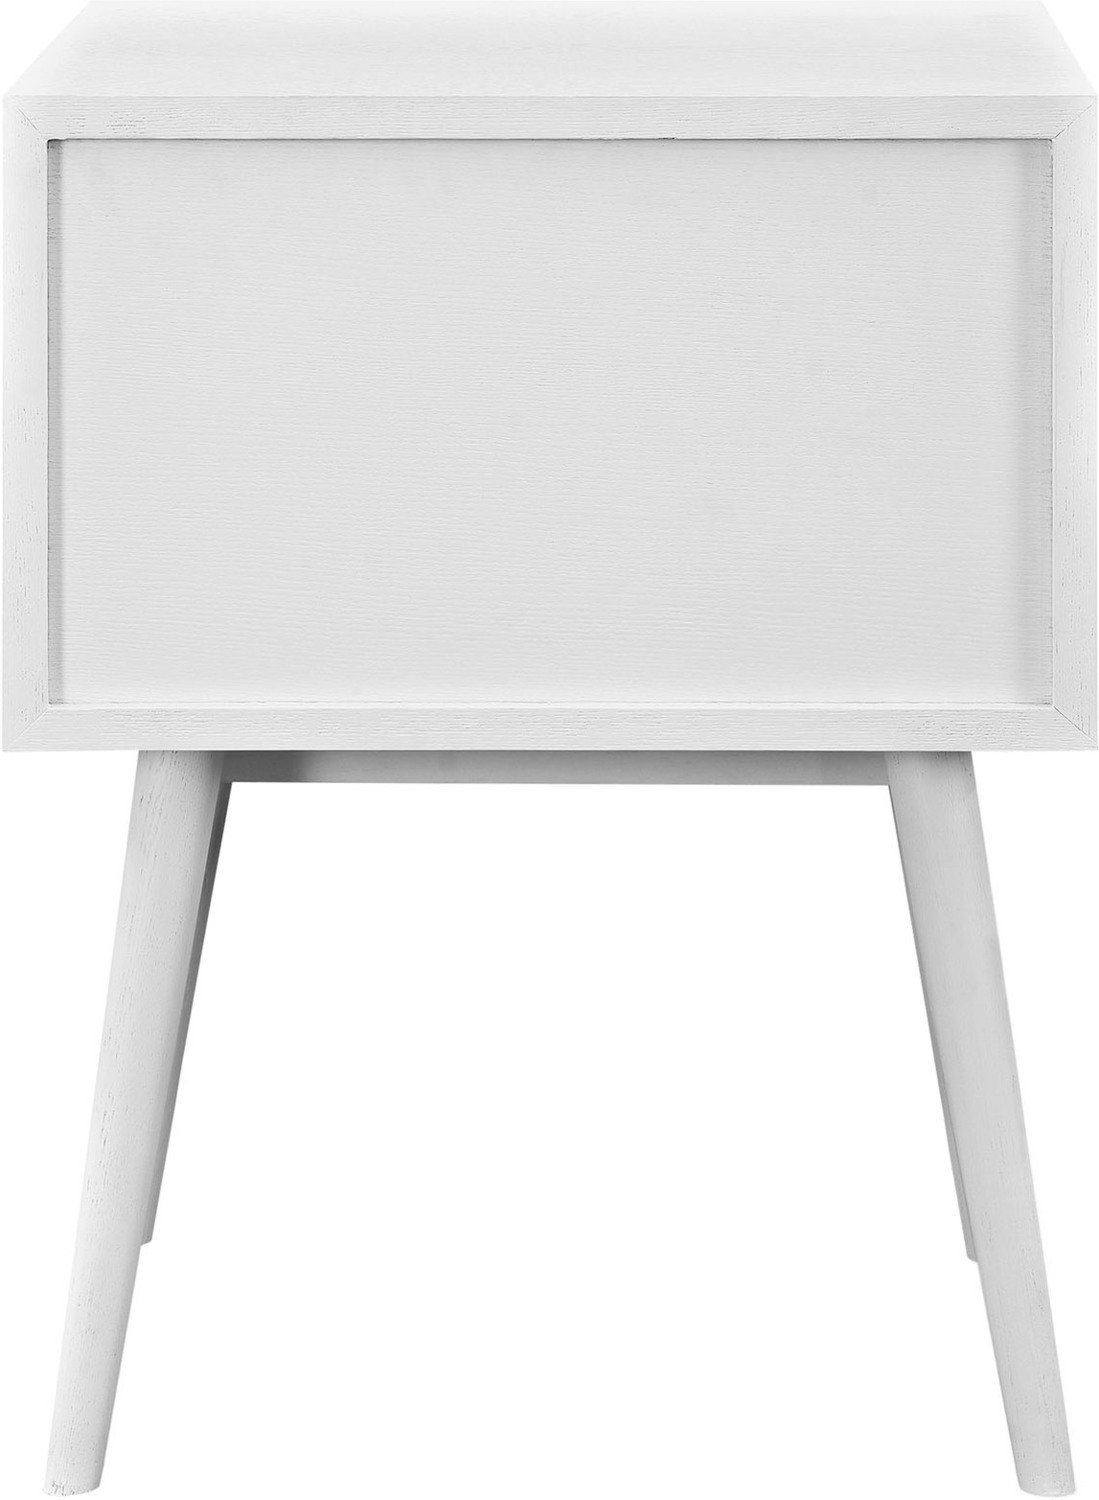 one drawer nightstand Modway Furniture Case Goods White